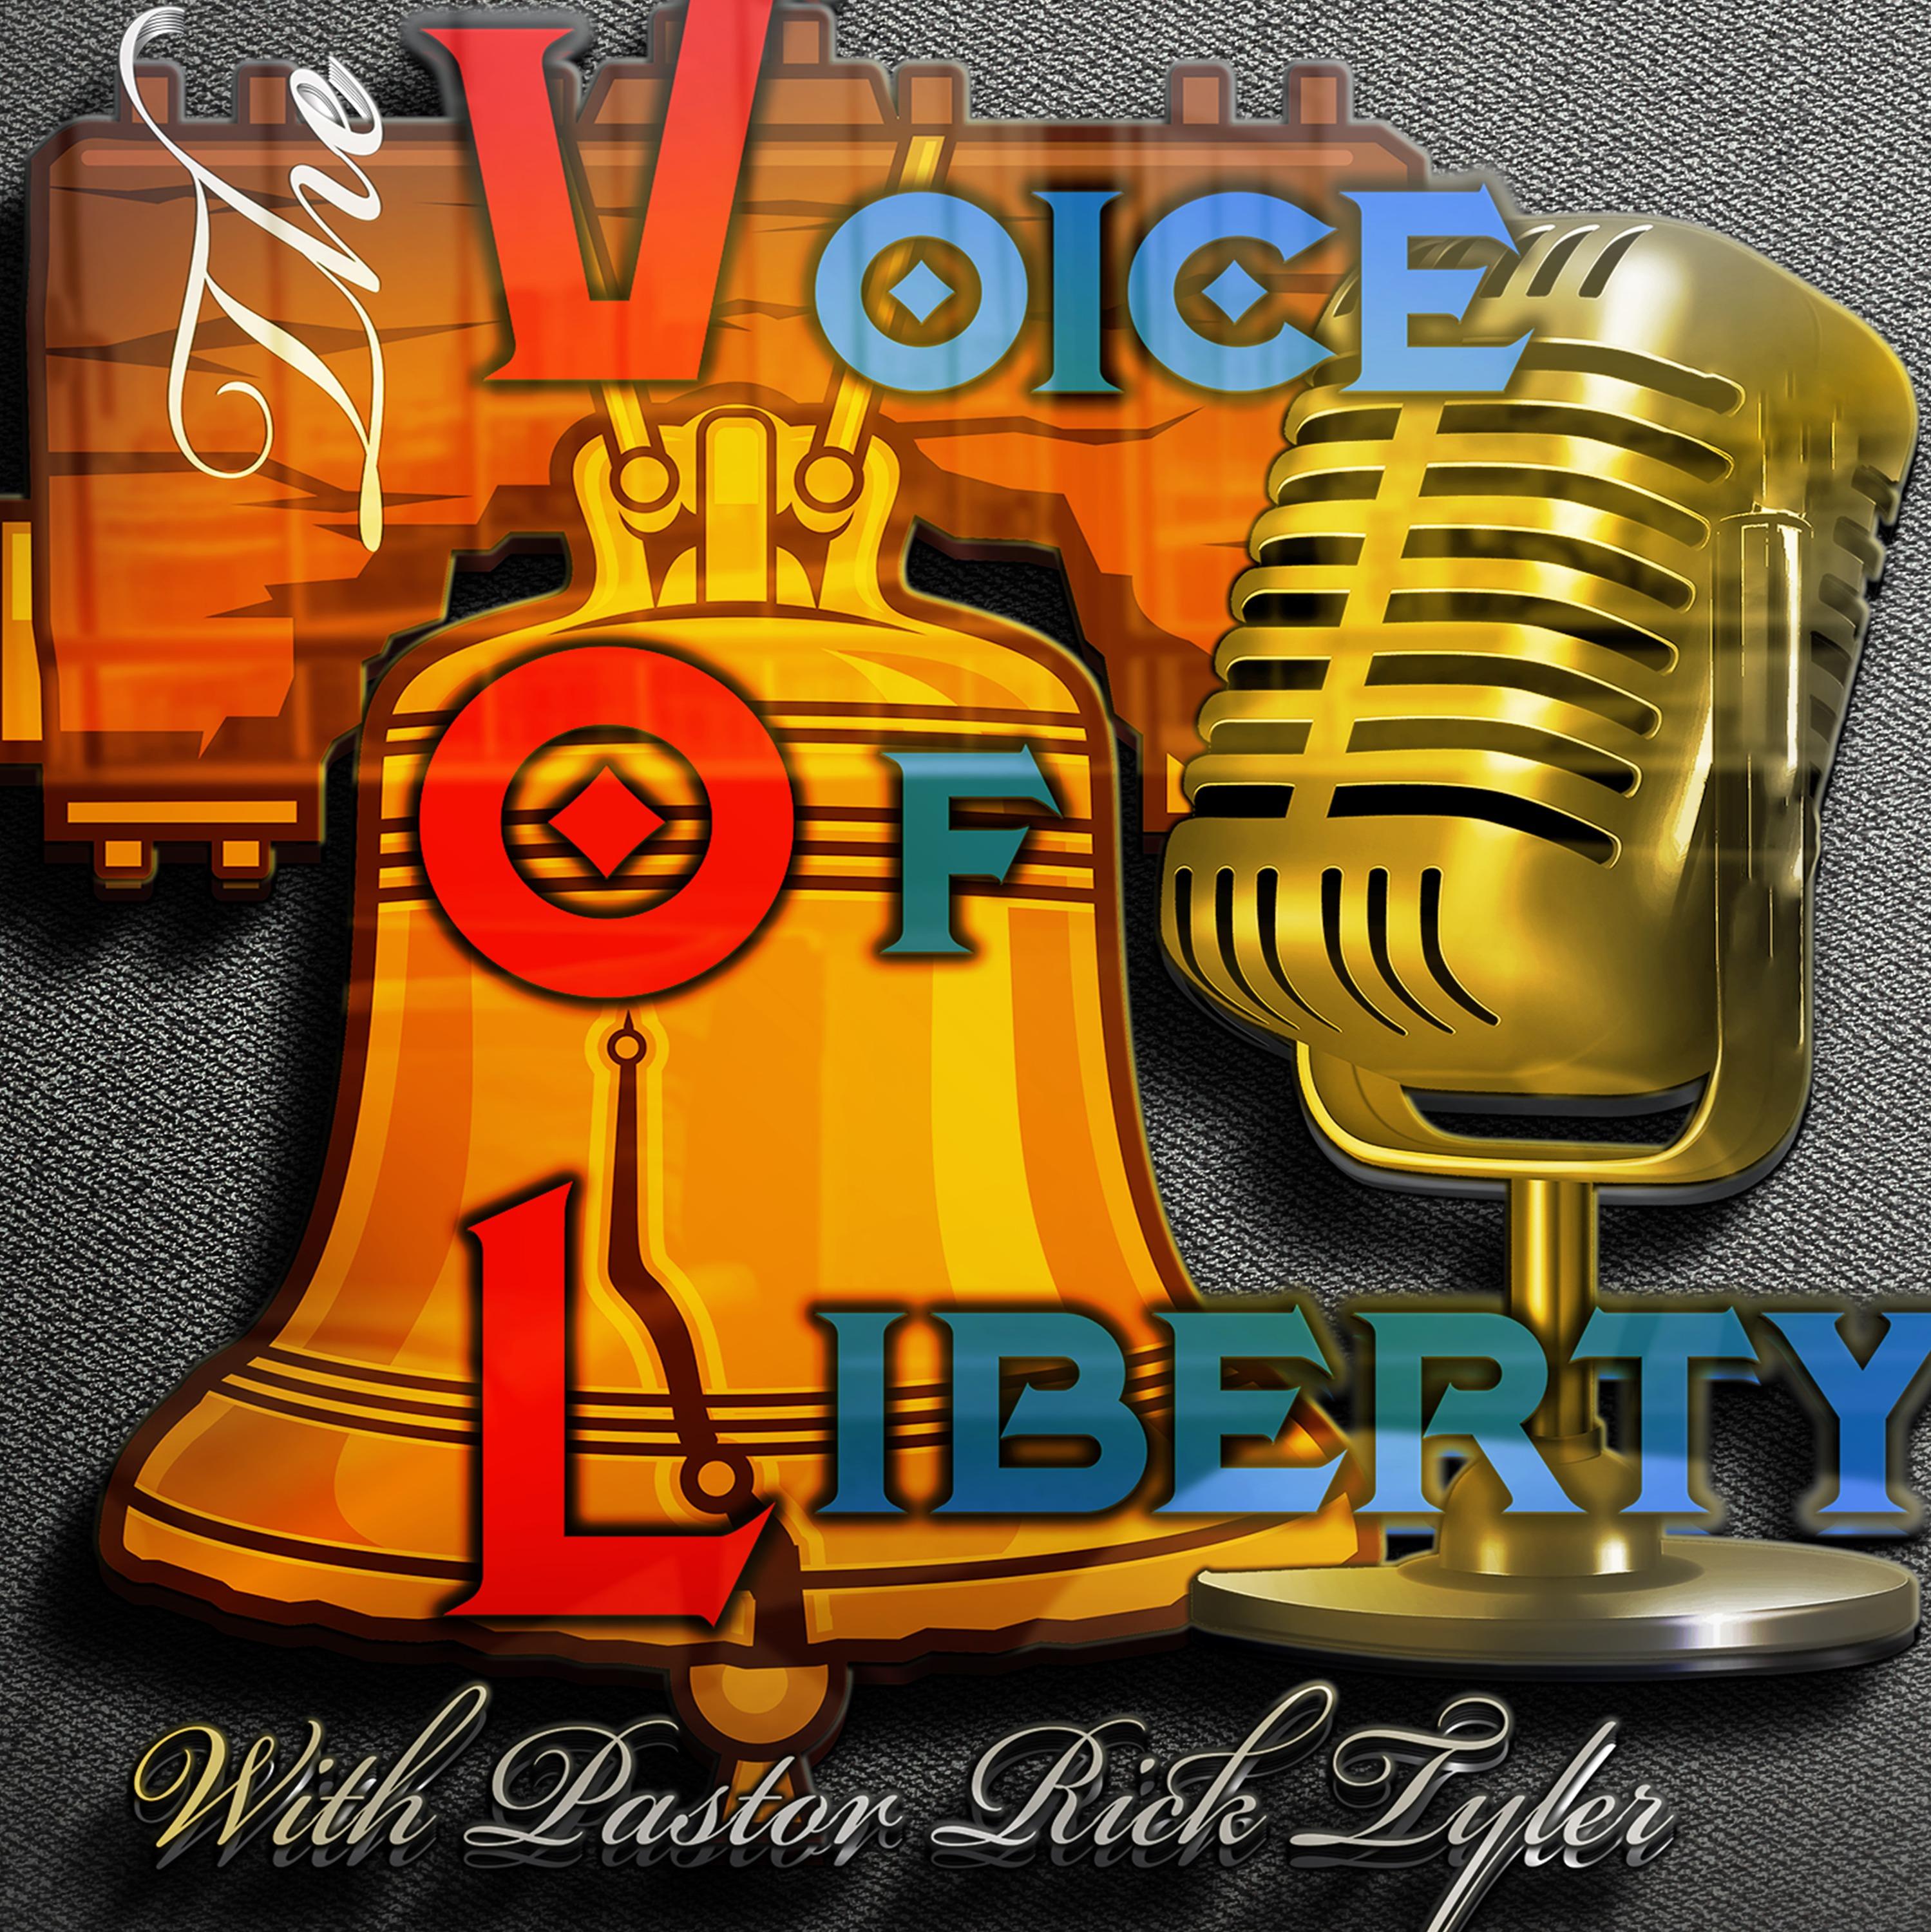 The Voice of Liberty